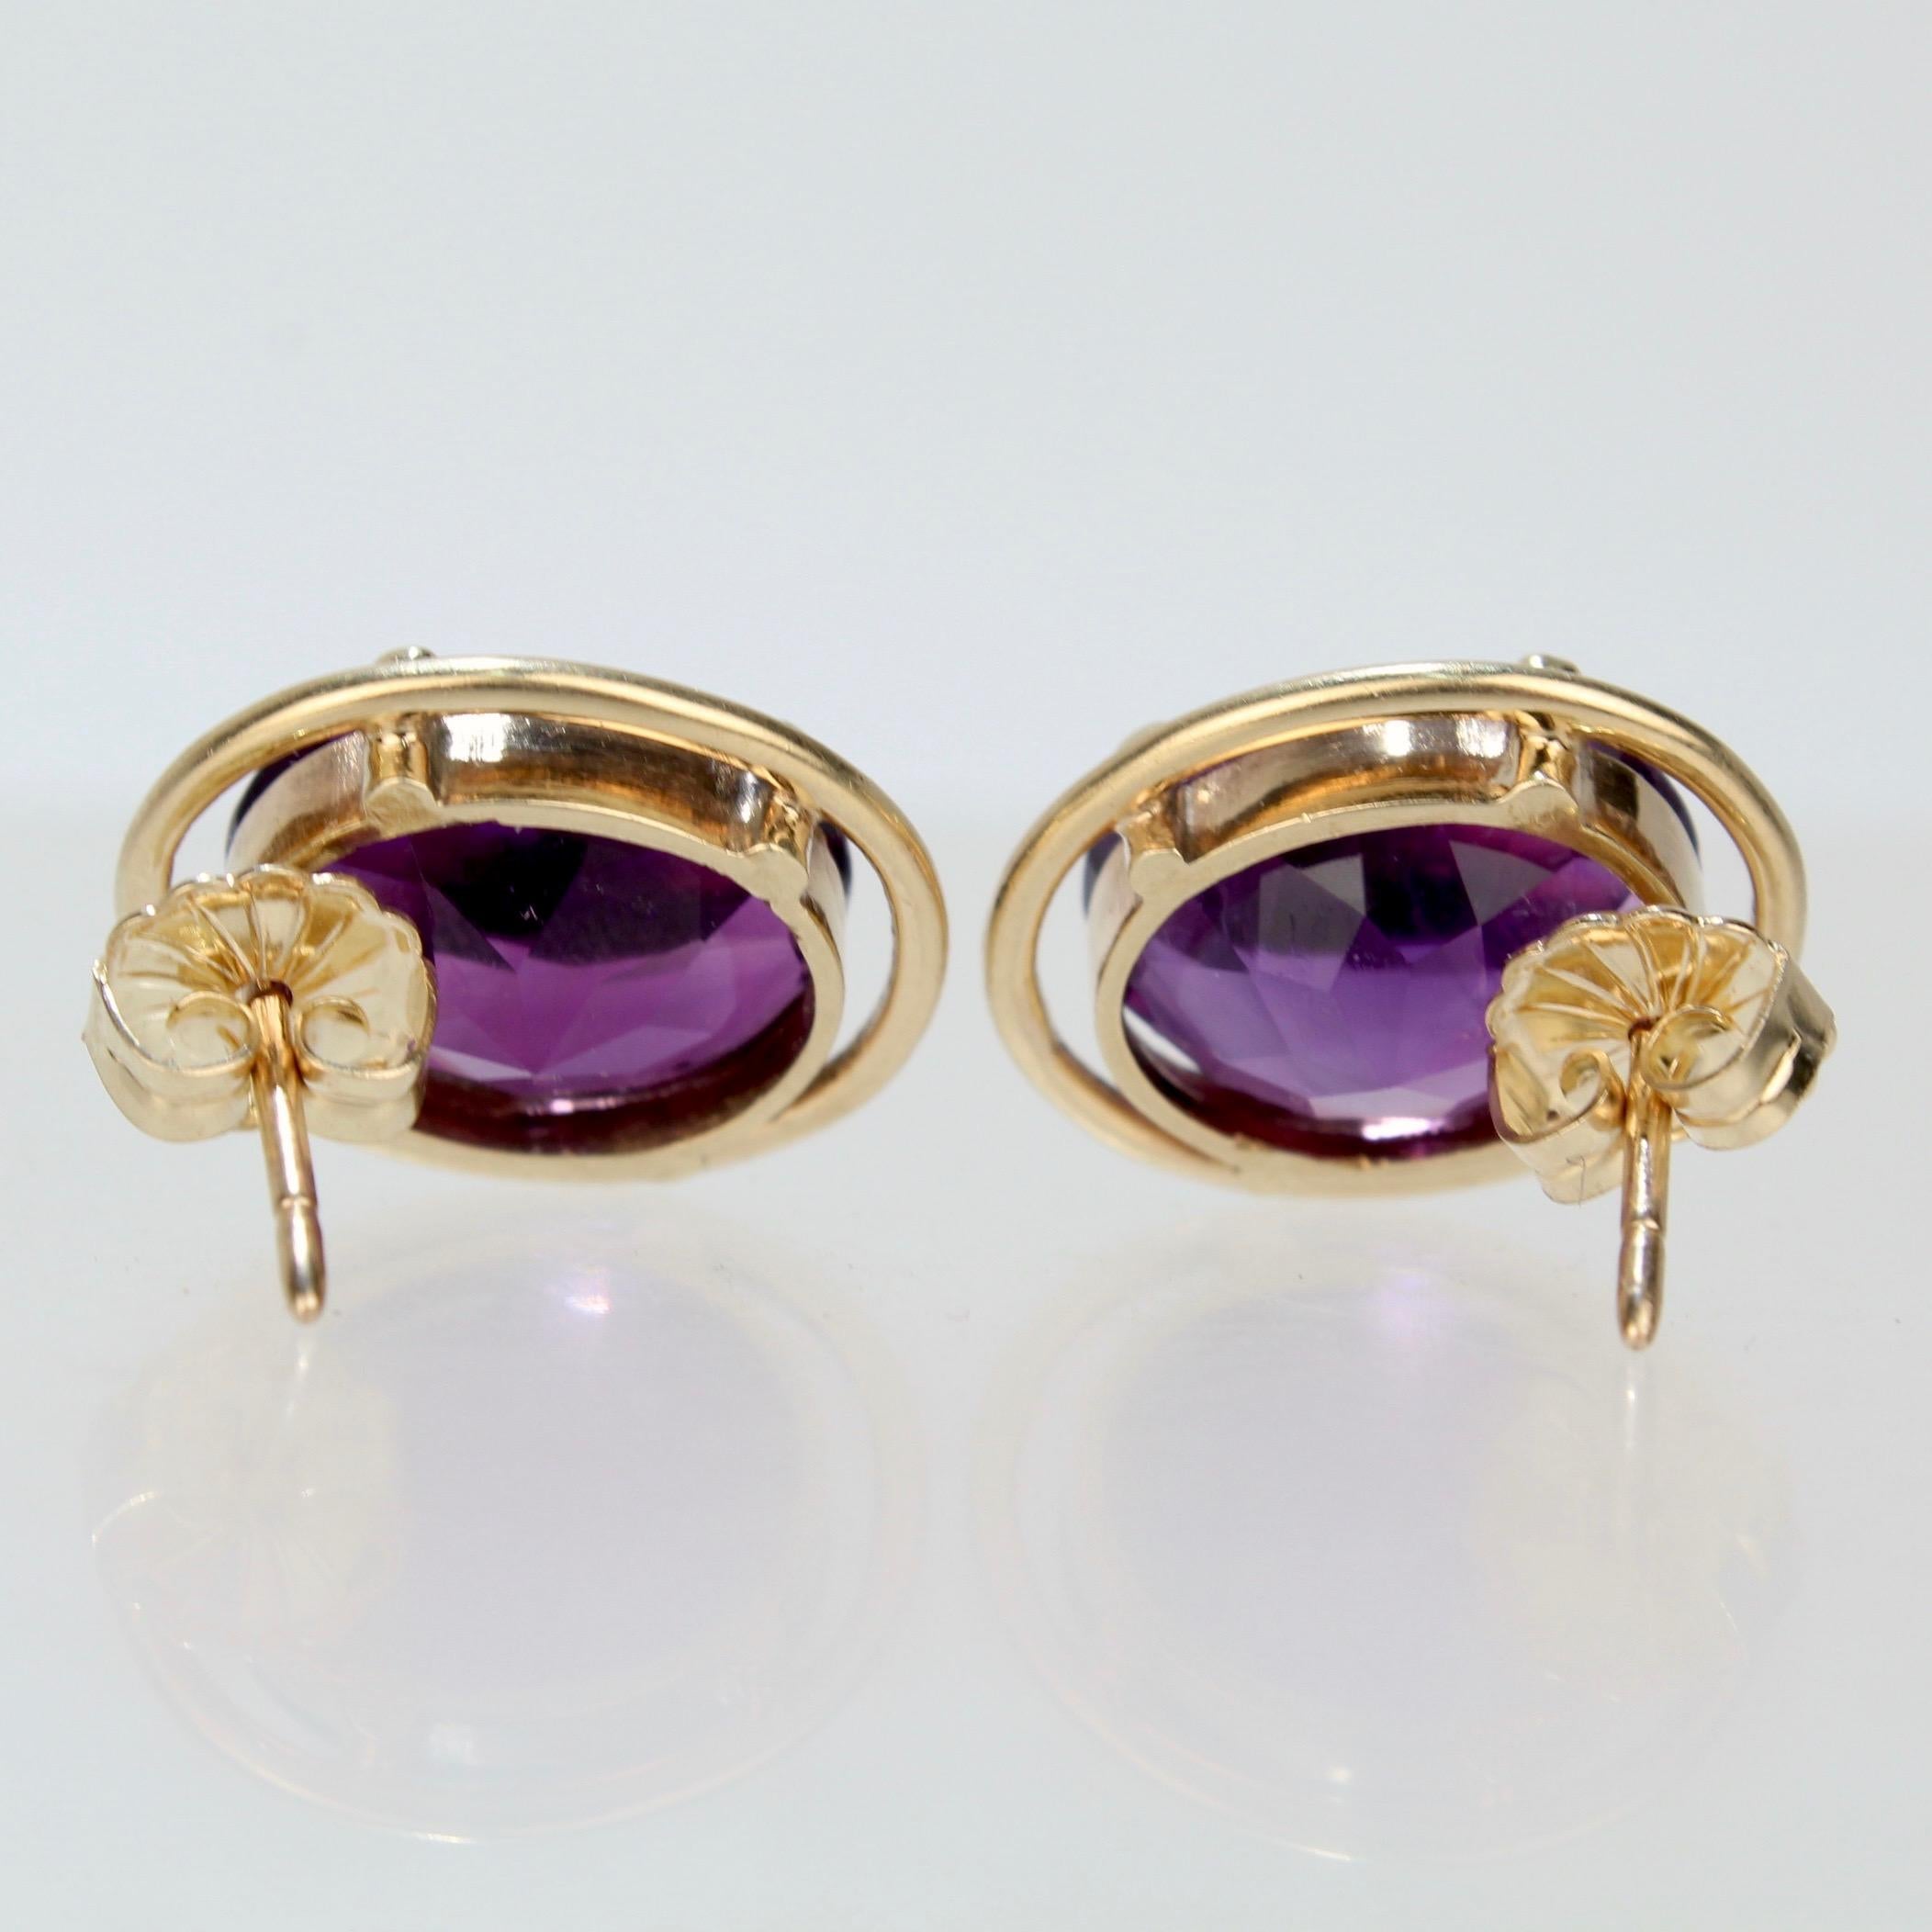 14 Karat Gold and Oval-Cut Purple Spinel Earrings In Good Condition For Sale In Philadelphia, PA